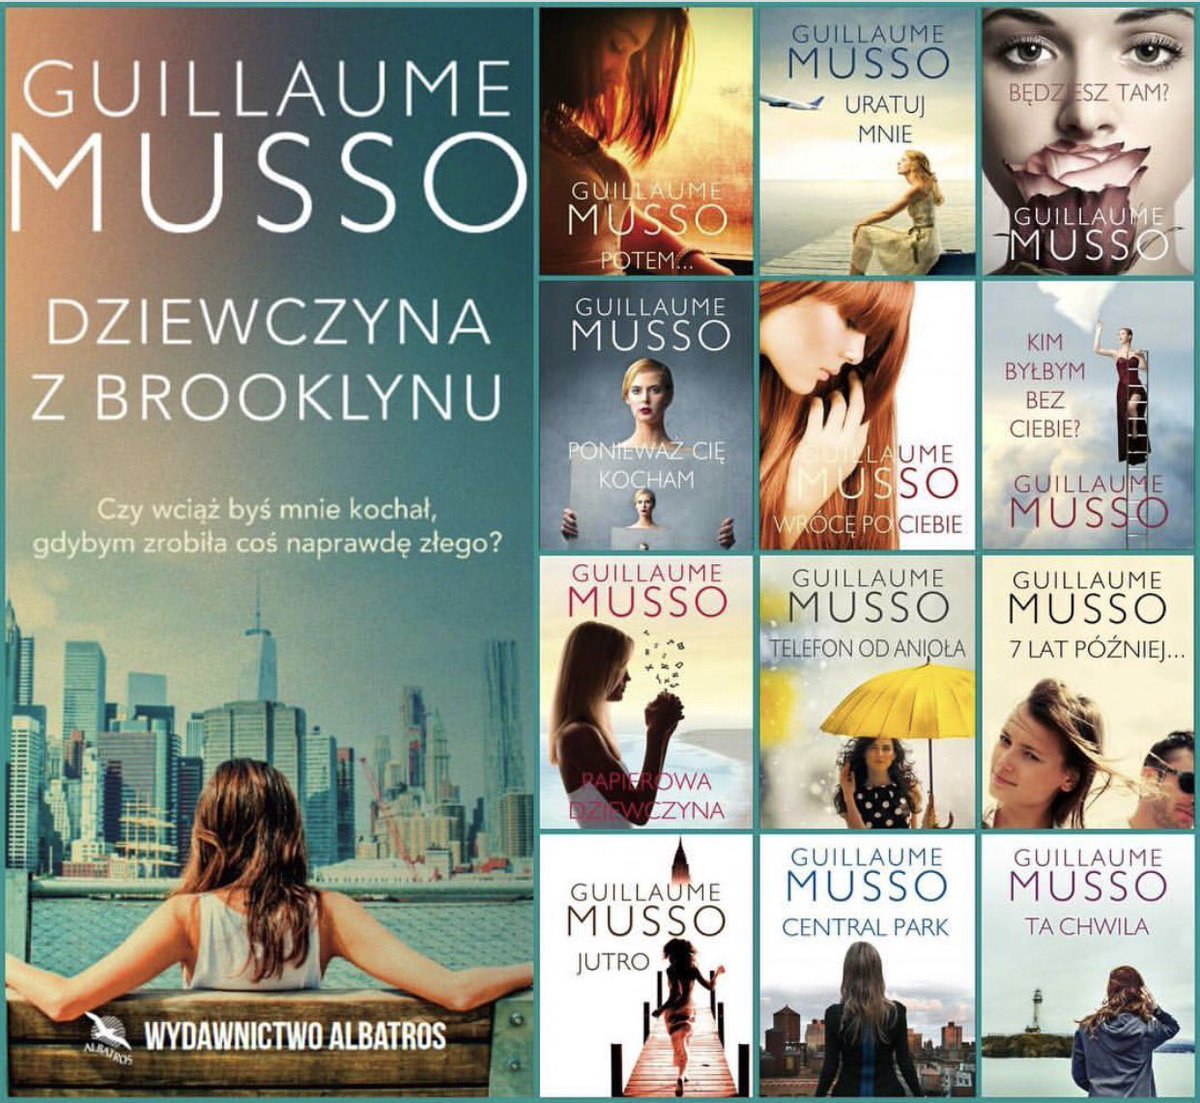 Guillaume Musso on X: 🇵🇱#lafilledebrooklyn will be published in Poland  next week by #wydawnictwoalbatros ! 😃🇵🇱  / X